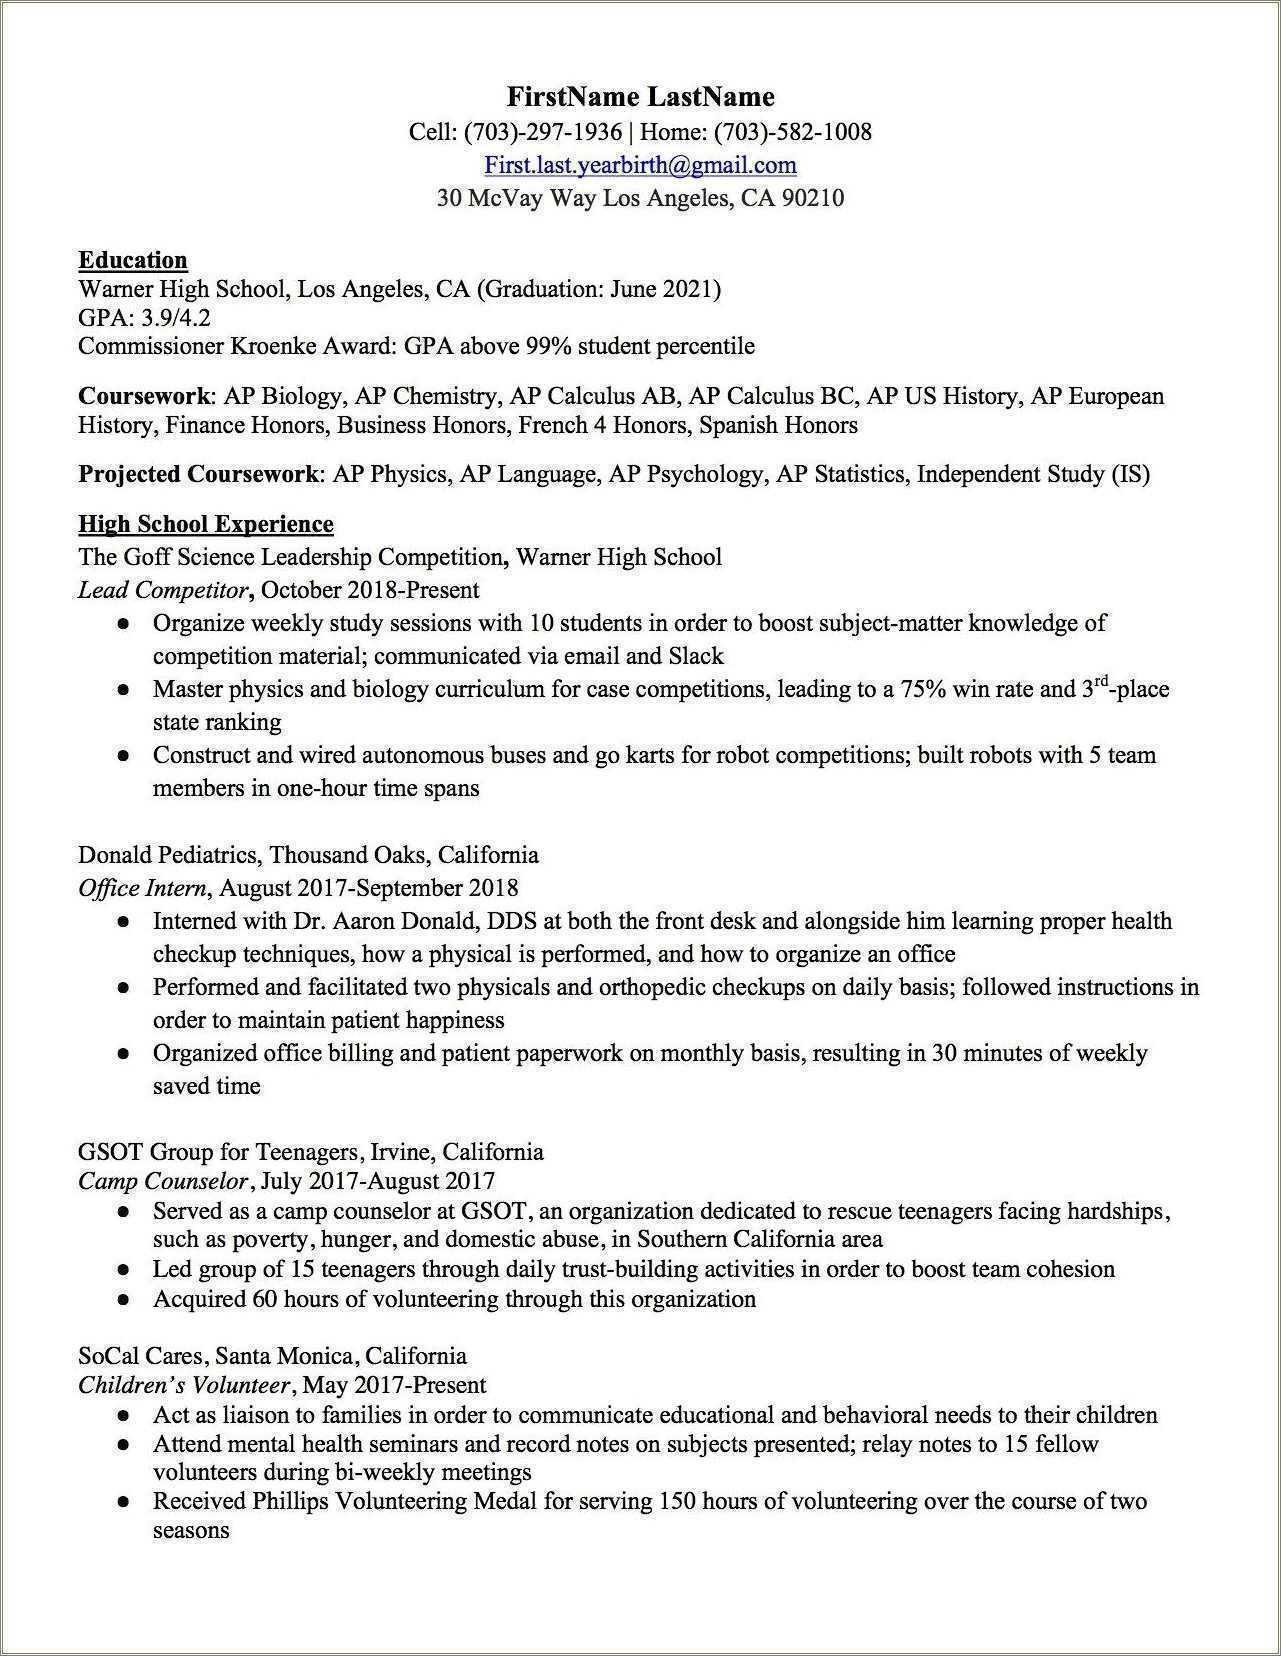 Extra Curricular Activities Resume Examples - Resume Example Gallery